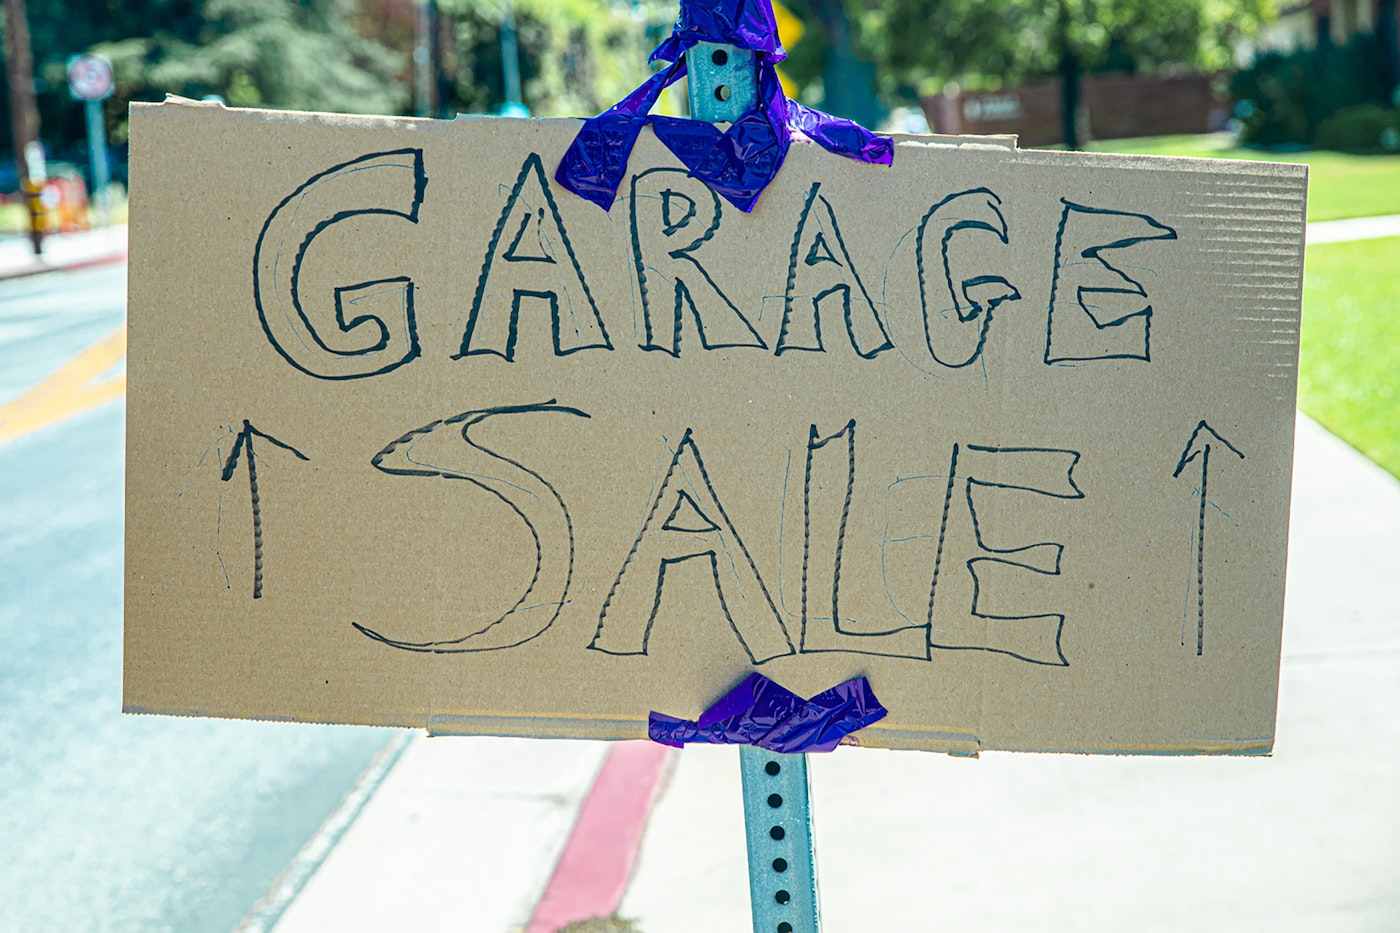 Garage sale sign - where to find recycled building materials to build a house